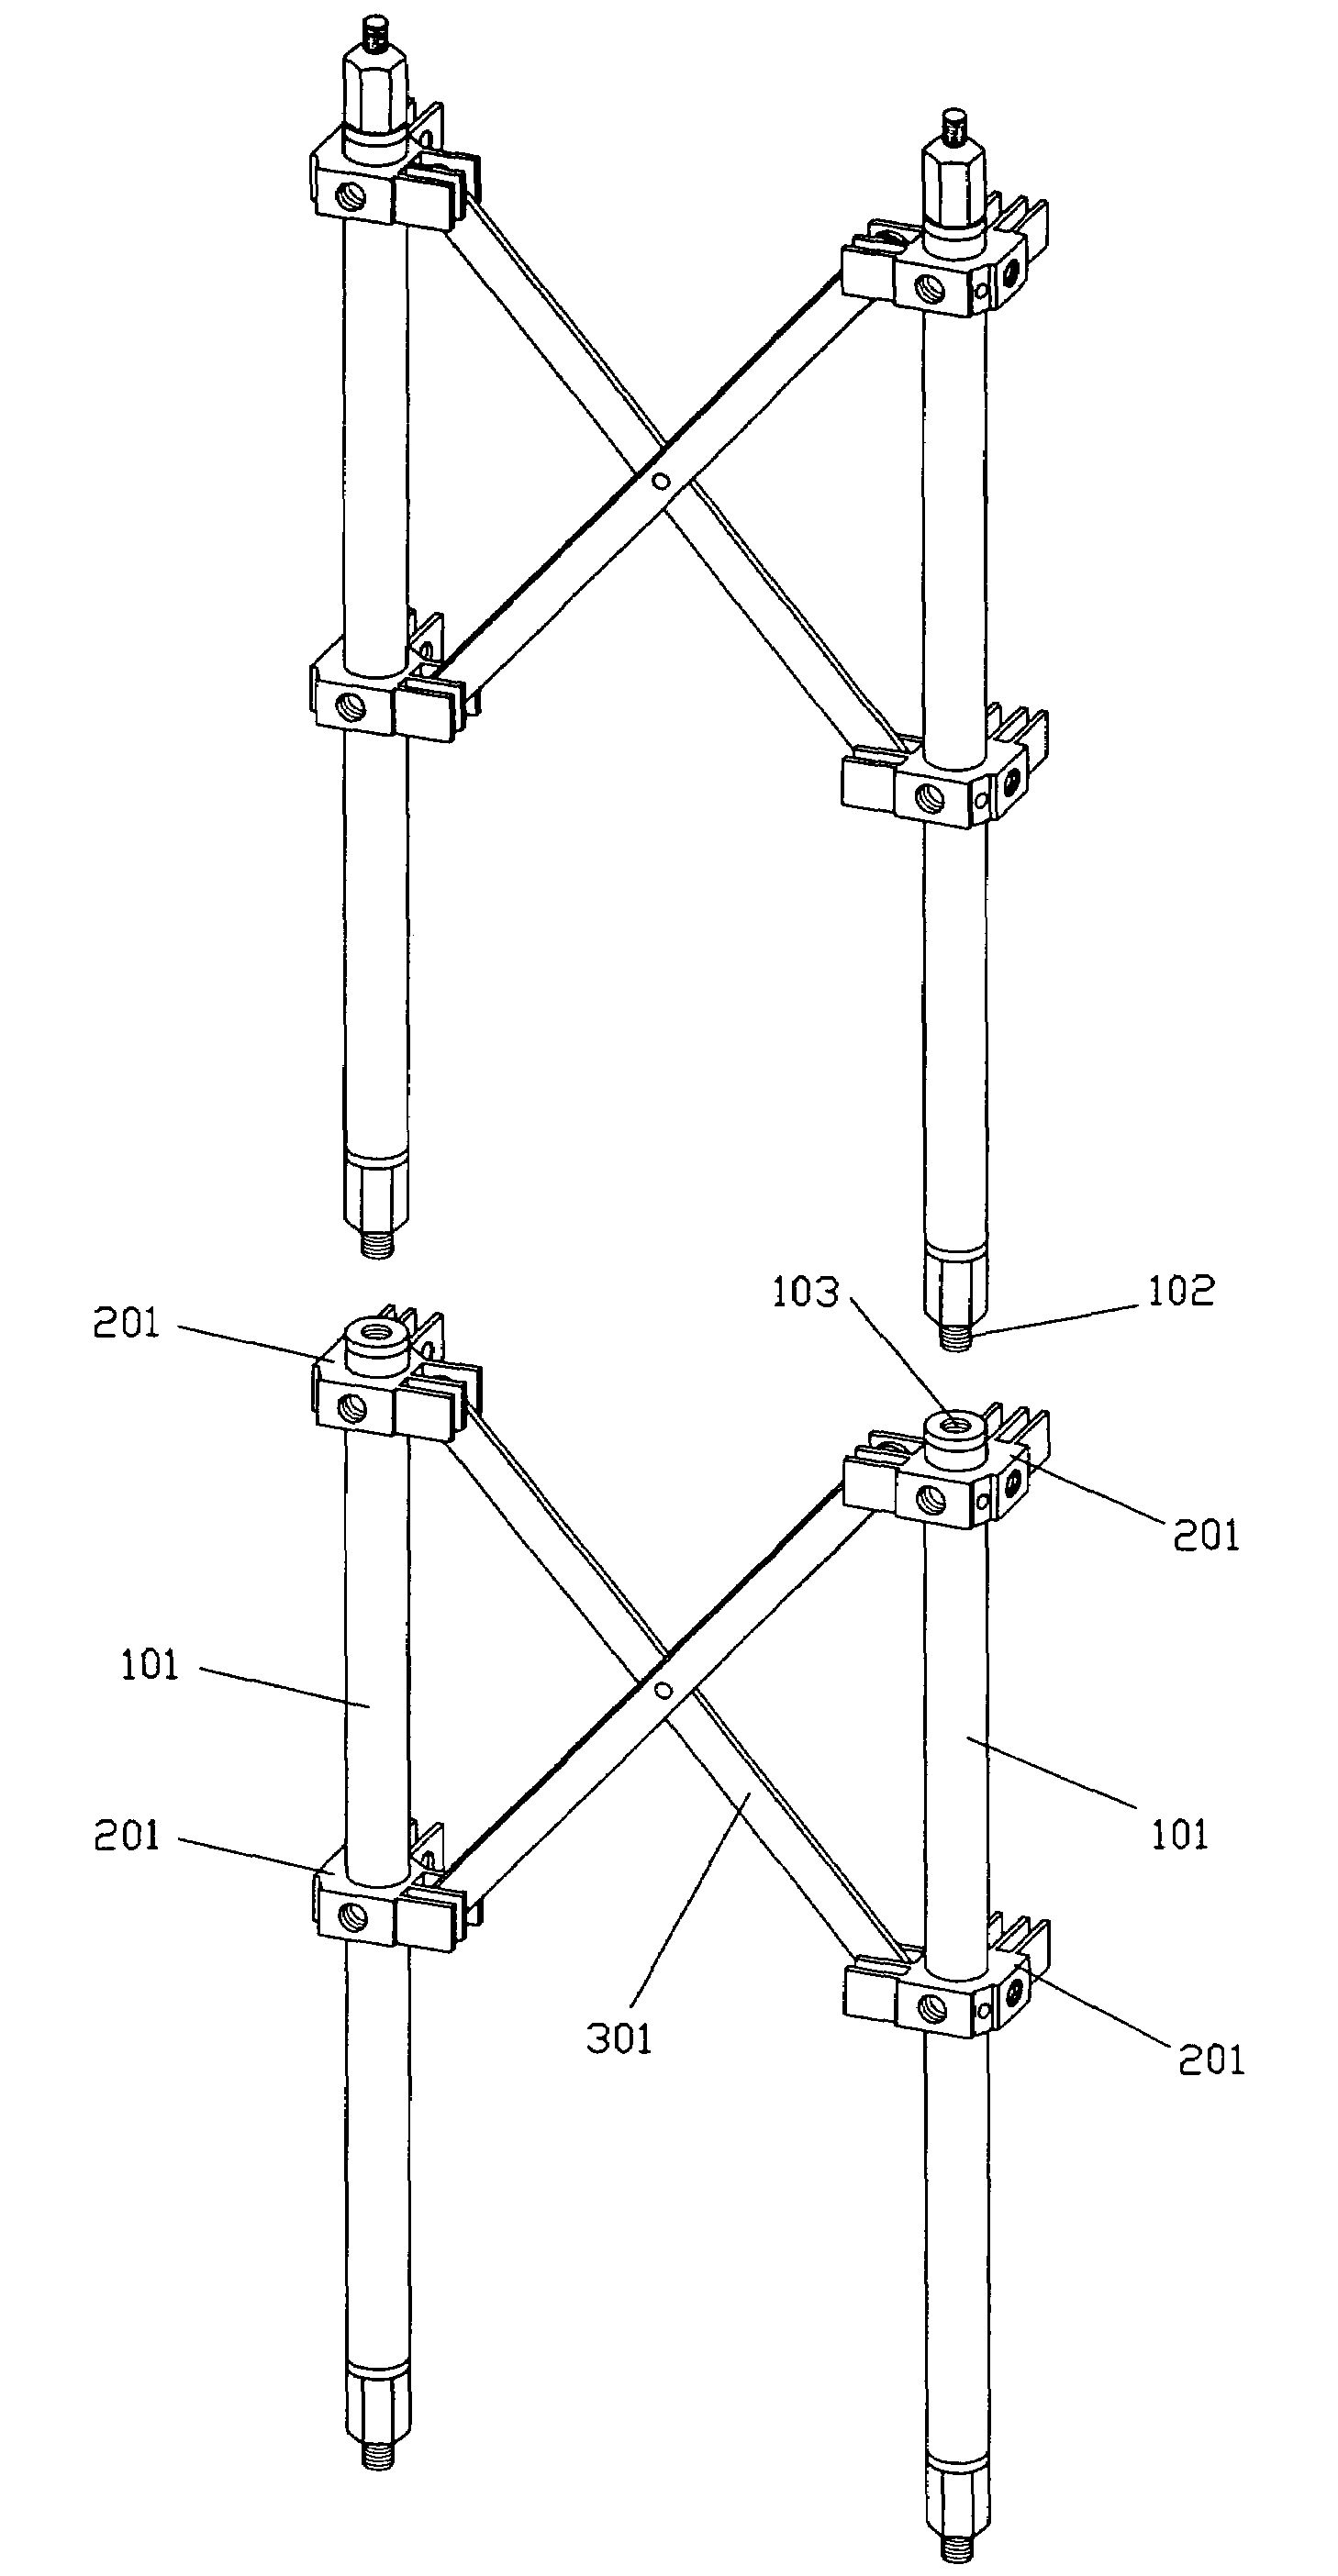 Structure of display rack